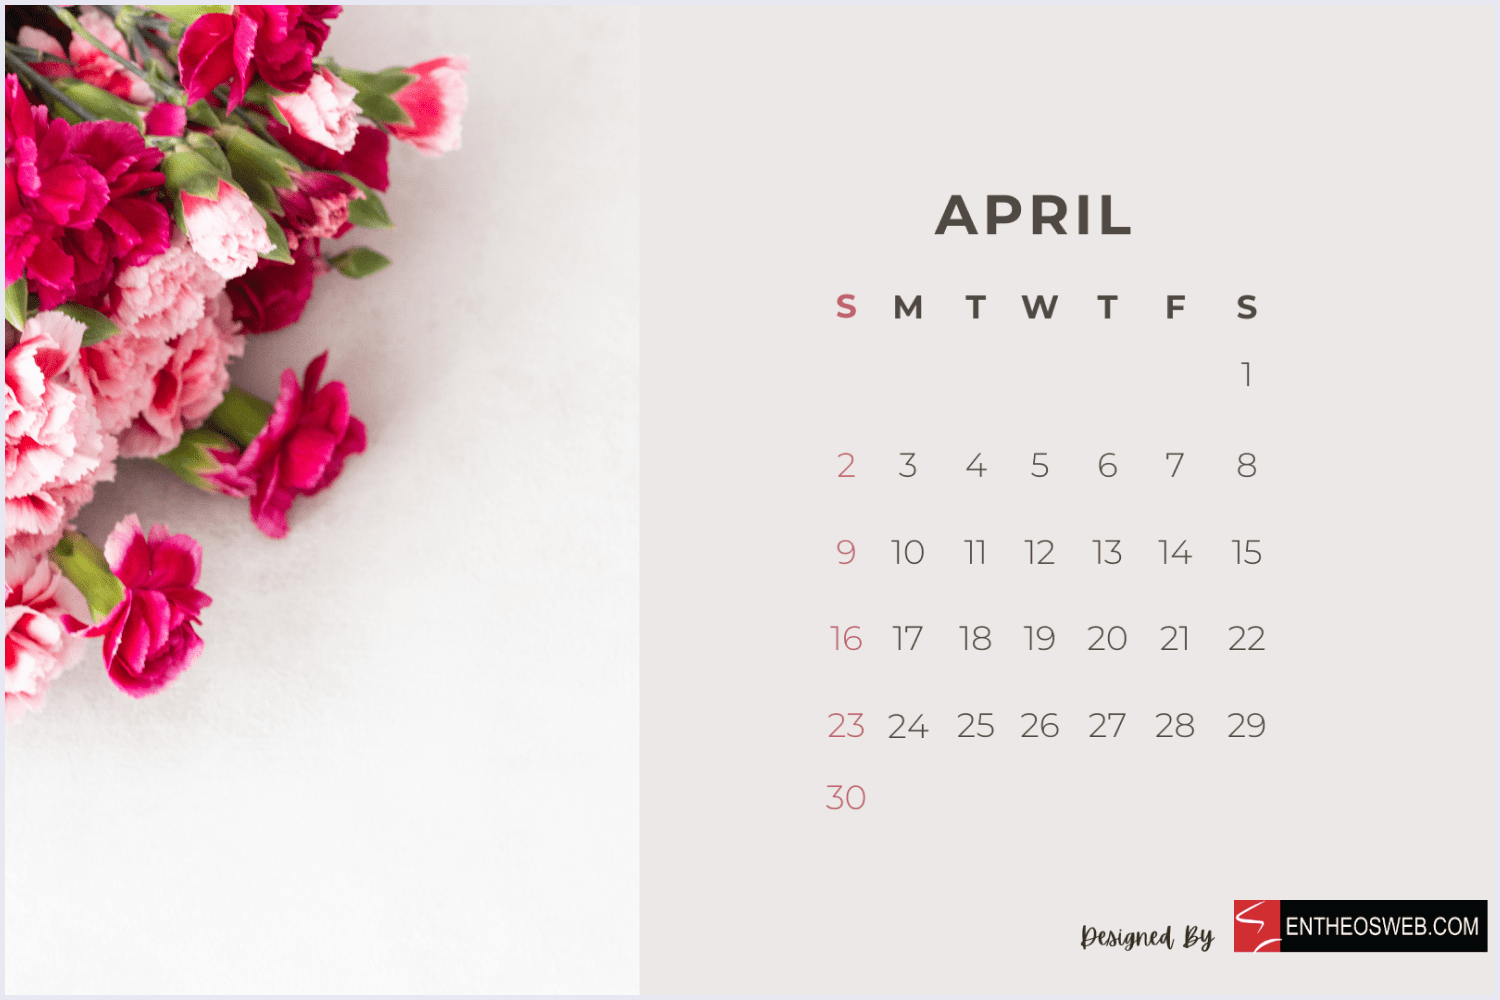 Aesthetic April calendar with stunning floral designs and customizable space.